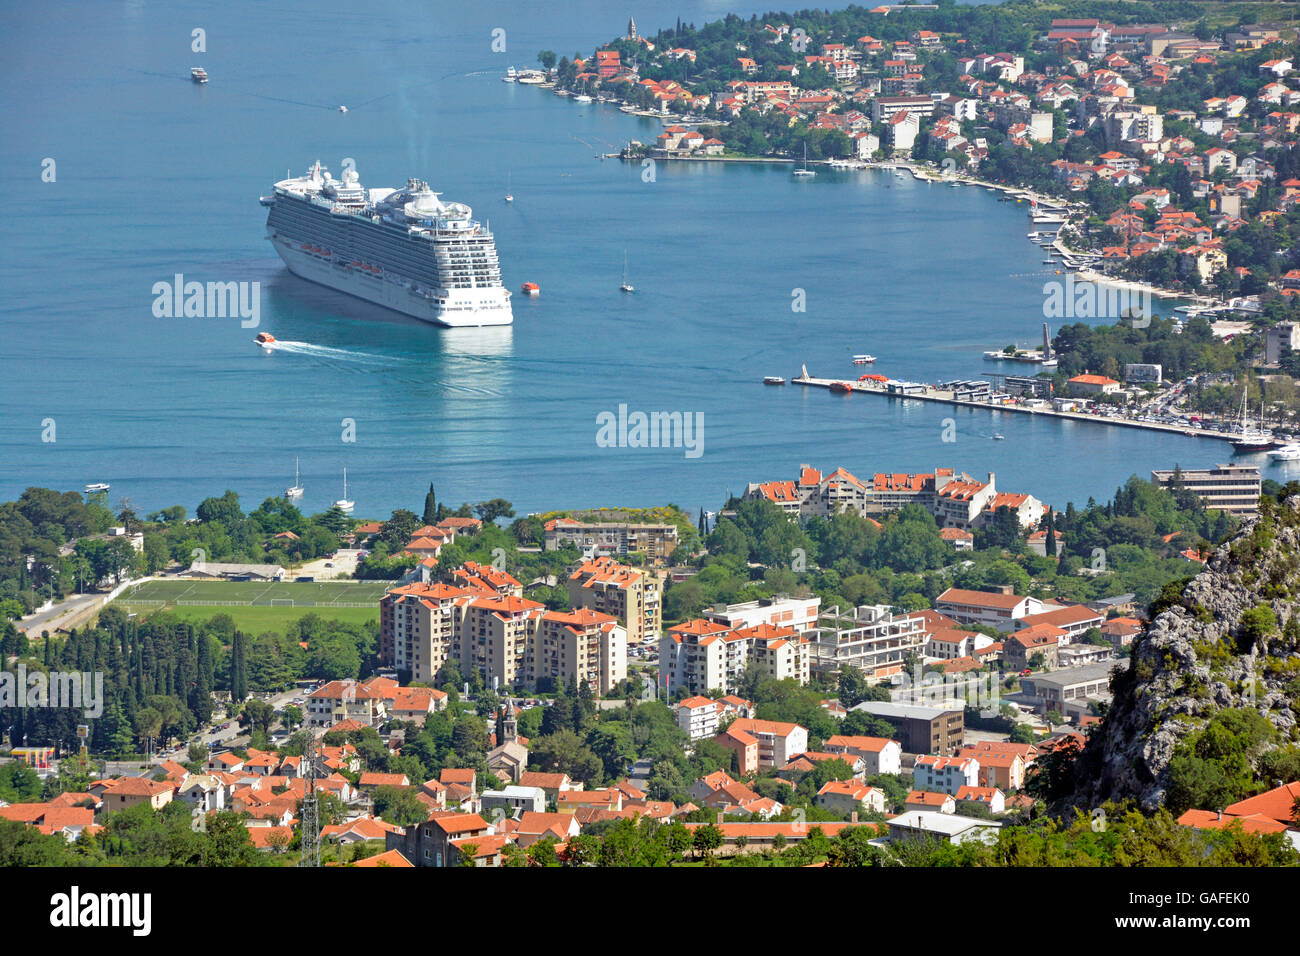 View from above looking down on town & Bay of Kotor Montenegro cruise ship liner Regal Princess using tenders to transport passengers to shallow jetty Stock Photo